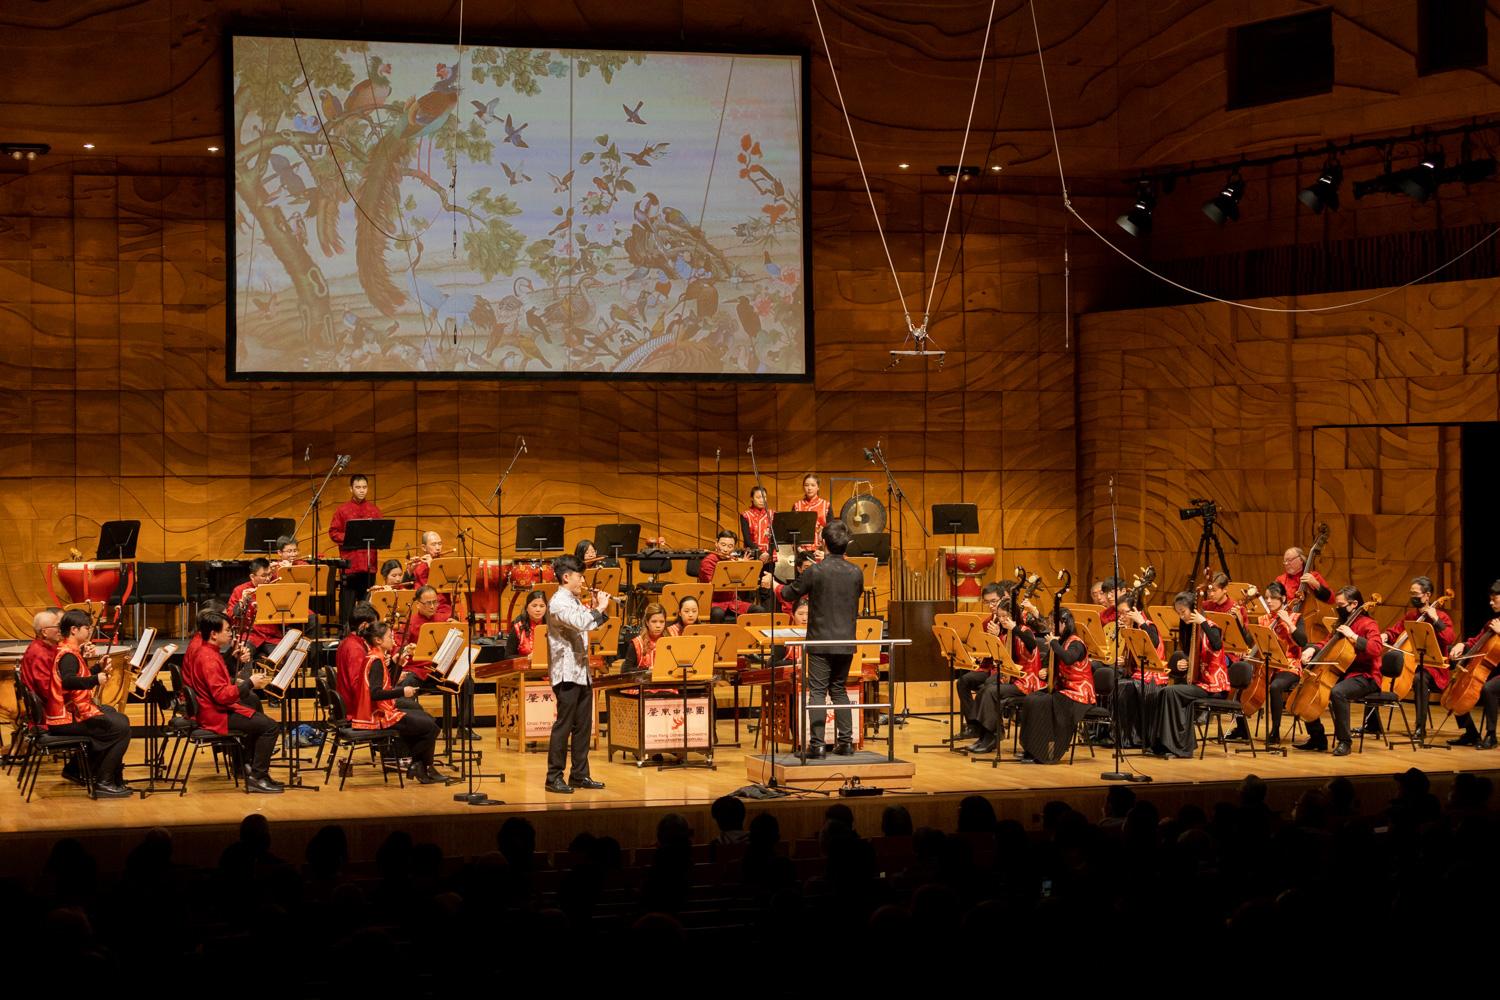 The Hong Kong Economic and Trade Office, Sydney, presented the "HK 25 & Chao Feng 40" Chinese music concert in Melbourne, Australia, yesterday (September 4) to celebrate the 25th anniversary of the establishment of the Hong Kong Special Administrative Region and promote traditional Chinese music. Various classic masterpieces were performed by Chao Feng Chinese Orchestra to bring the audience an unforgettable experience of traditional Chinese music.